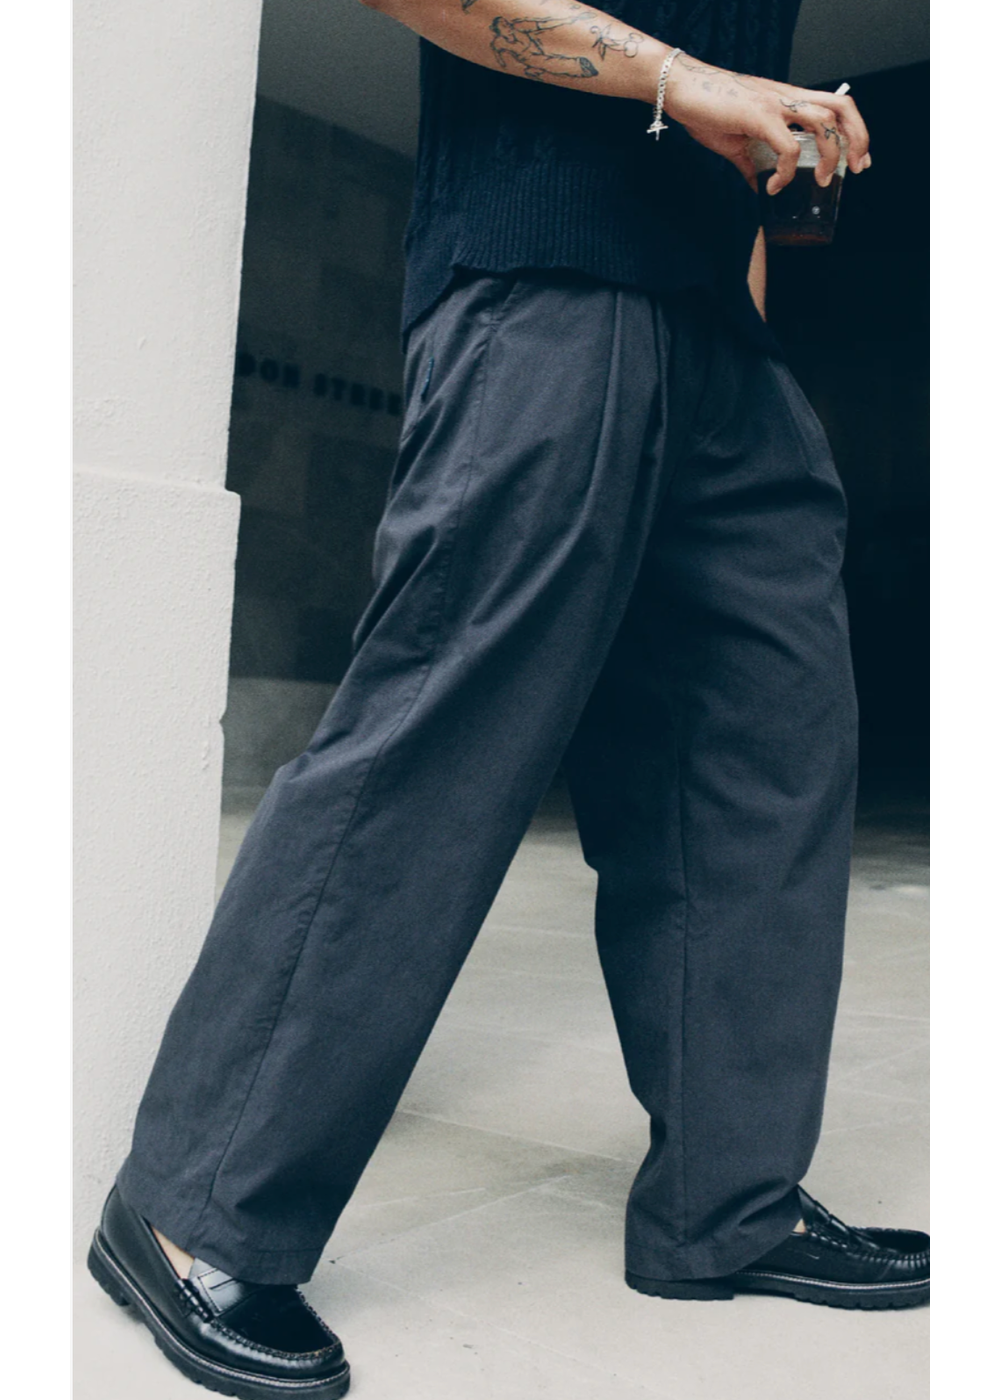 PLEATED PORTER PANT NAVY | PORTER JAMES SPORTS | Mad About The Boy